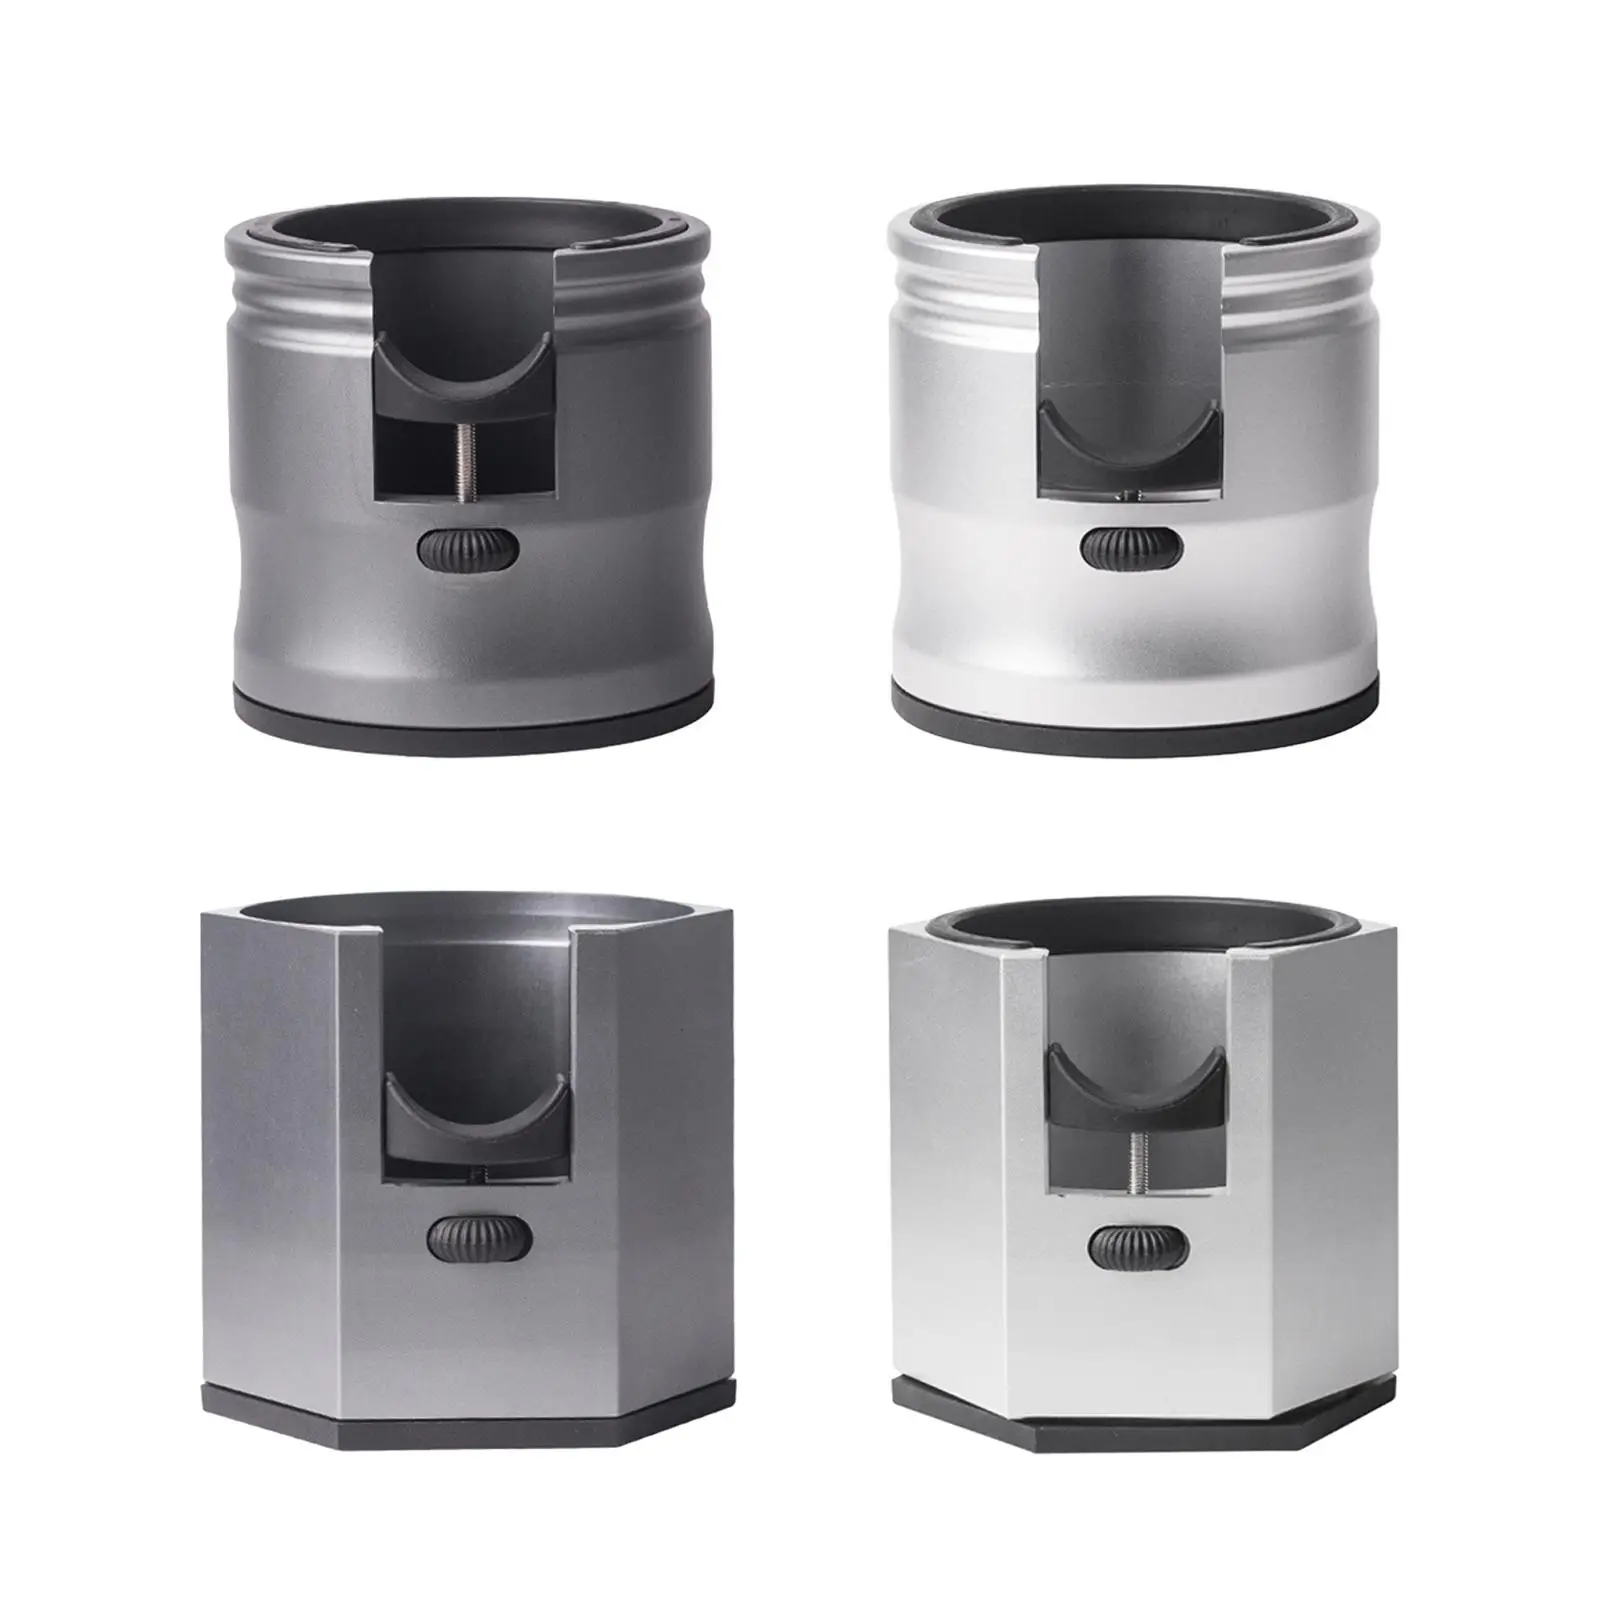 Aluminum Alloy Portafilter Stand Holder, Coffee Tamper Holder with Non Slip Base for Cafe